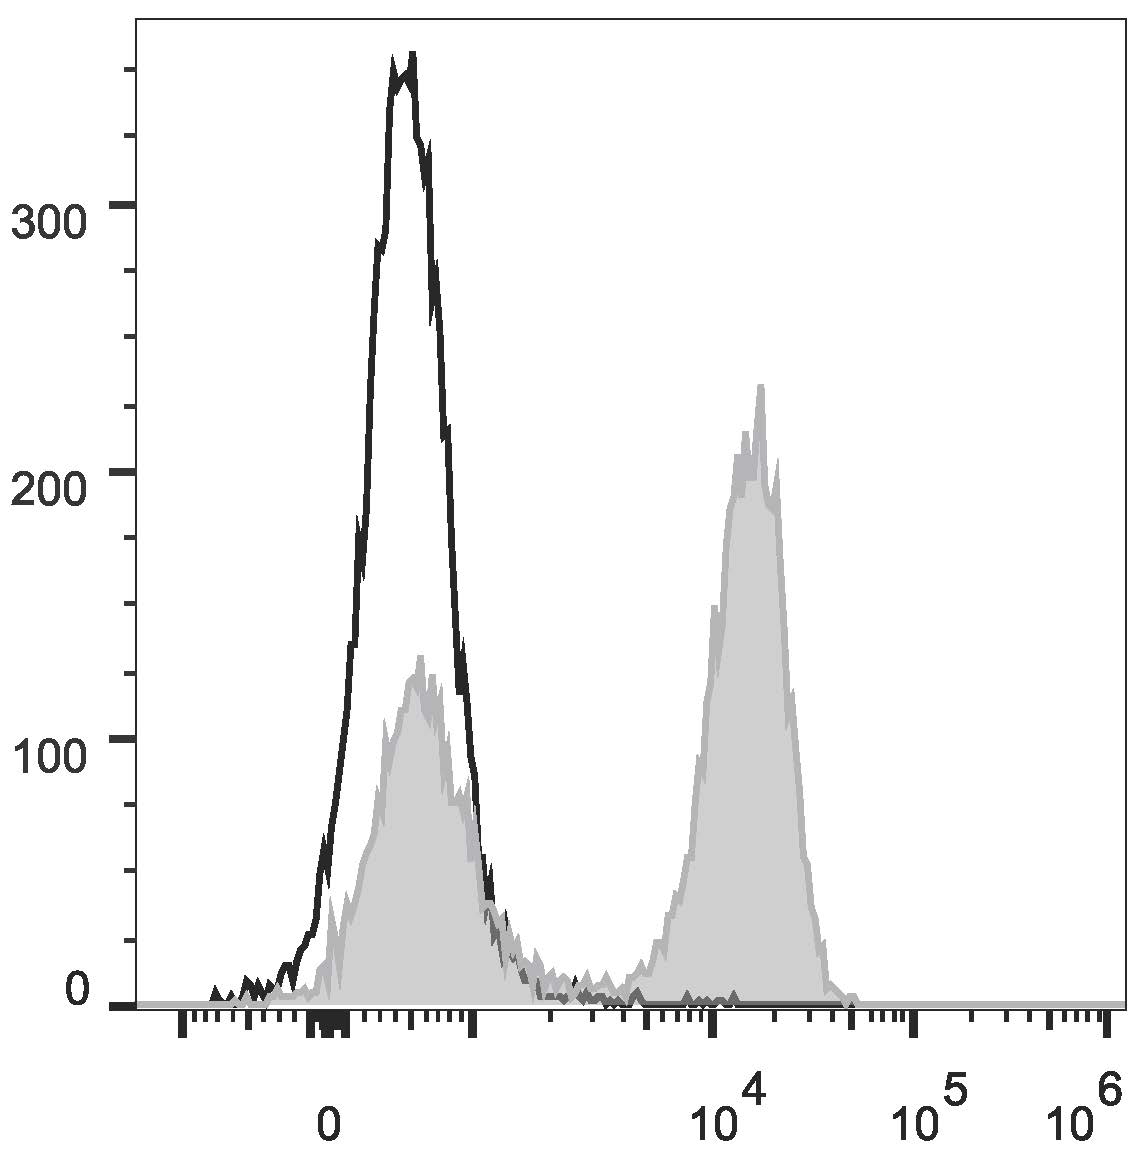 Rat splenocytes are  stained with Anti-Rat CD3 Monoclonal Antibody(FITC Conjugated)[Used at 0.2 μg/10<sup>6</sup> cells dilution](filled gray histogram). Unstained splenocytes (empty black histogram) are used as control.